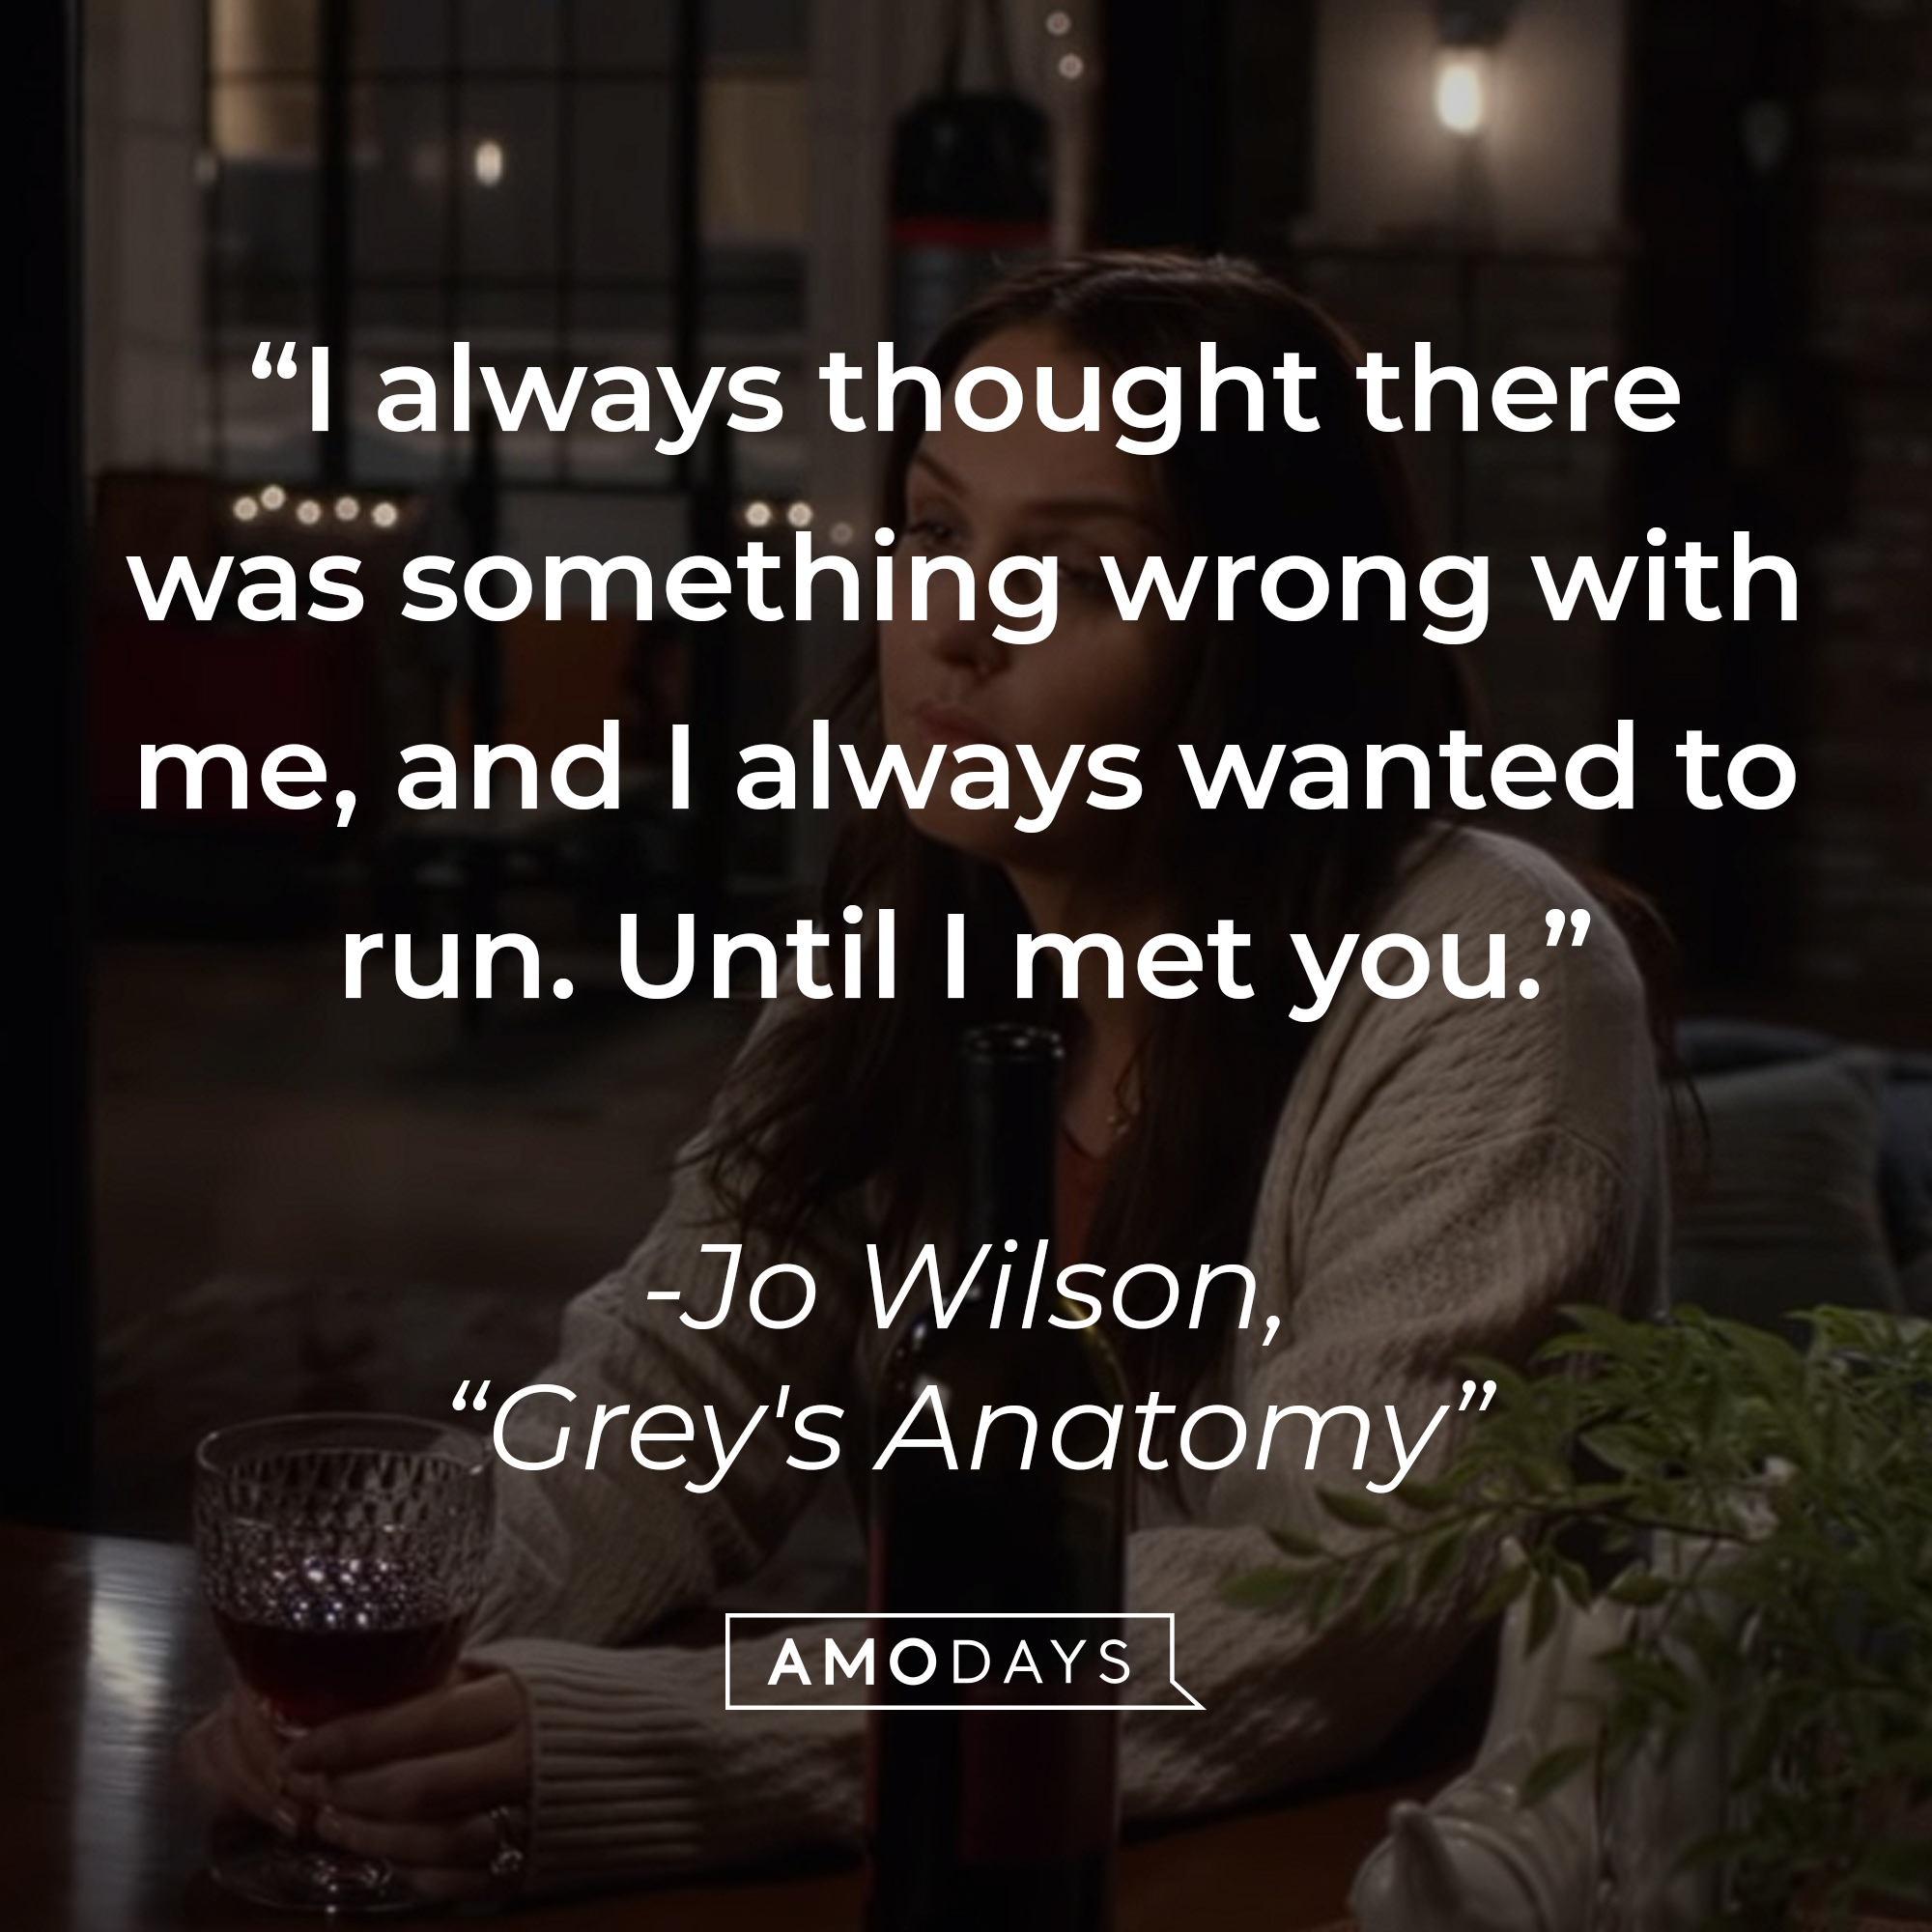 Jo Wilson’s quote from “Grey’s Anatomy”: "I always thought there was something wrong with me, and I always wanted to run. Until I met you." | Source: youtube.com/ABCNetwork